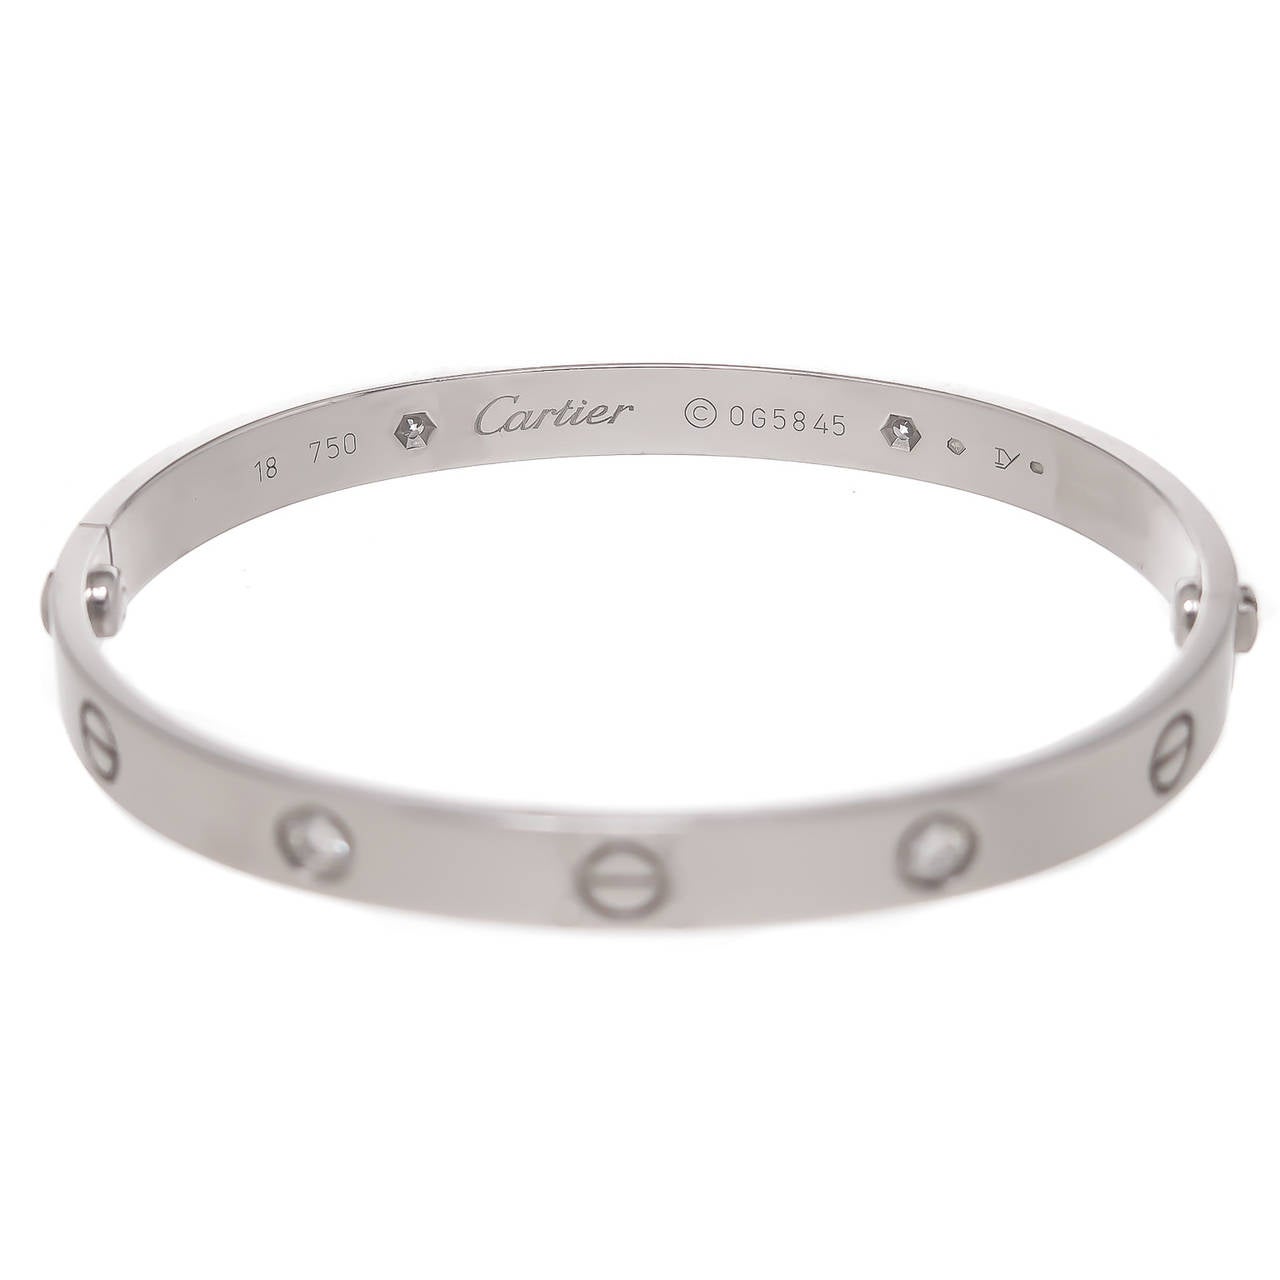 Cartier 18K White Gold Love Bracelet, set with 4 Round Brilliant cut Diamonds. Wrist size 18. Signed, Numbered and Having French Hall Marks. With Screwdriver and Cartier Presentation box.